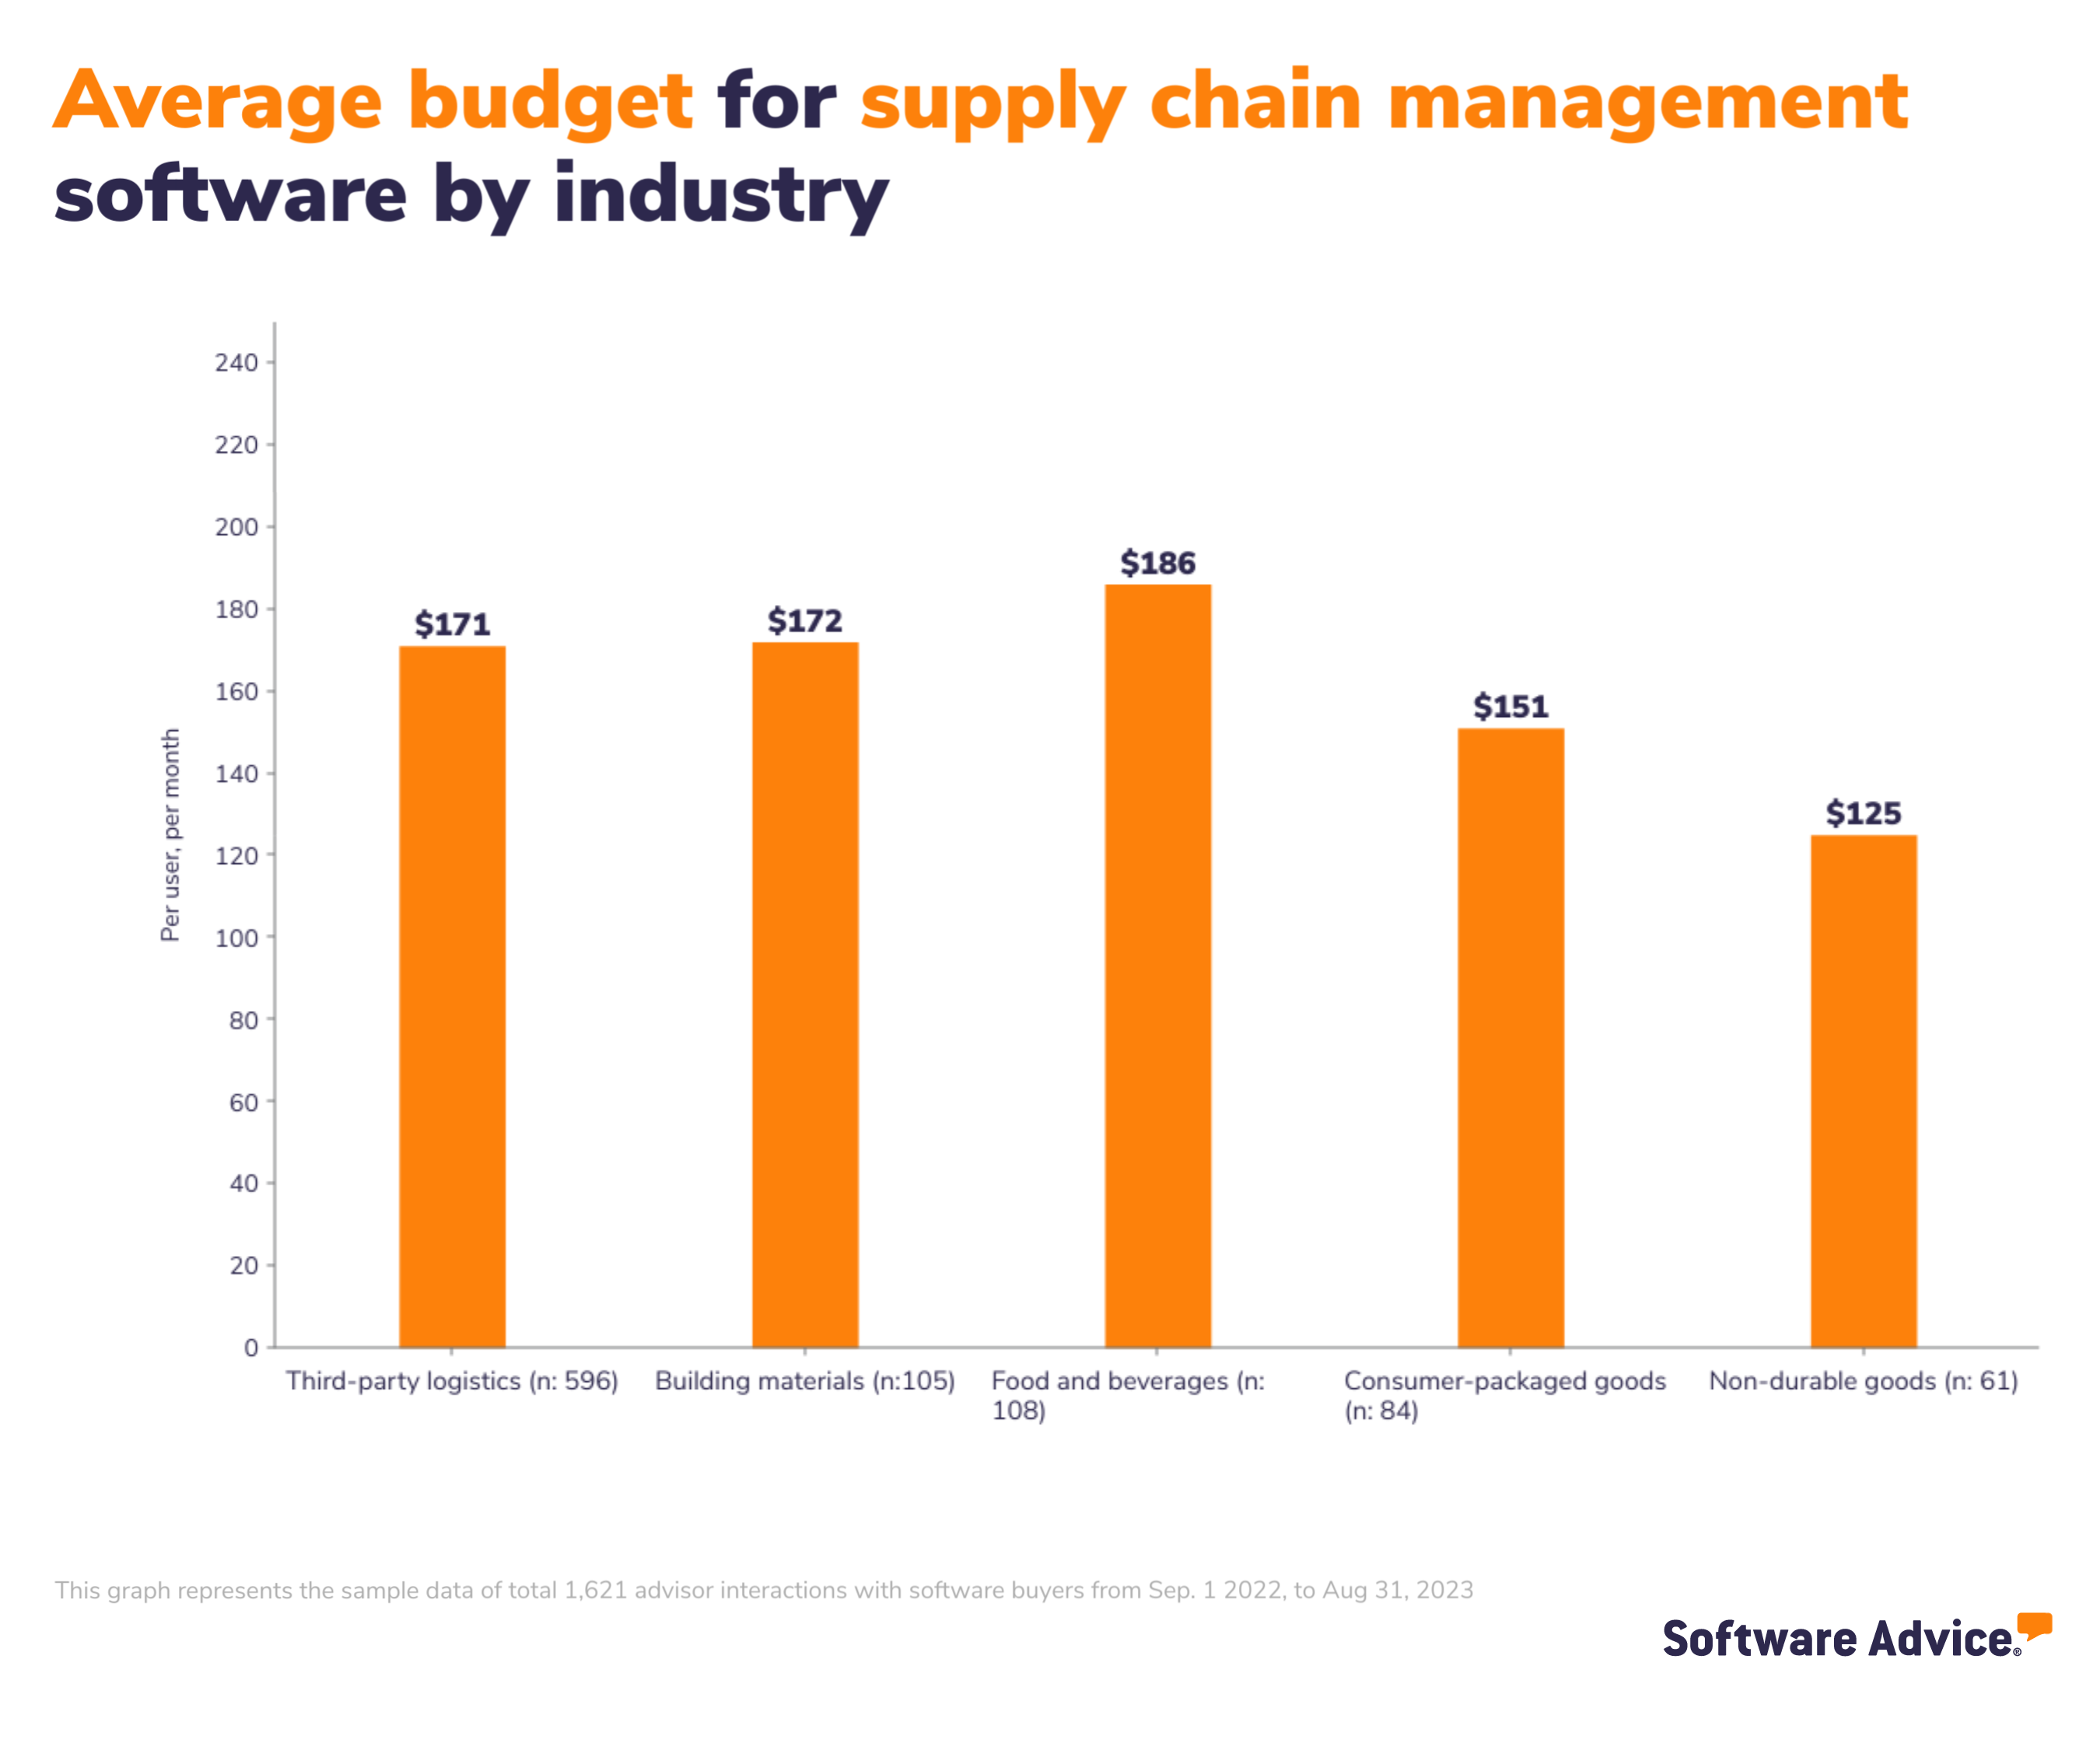 Average budget for SCM software by industry